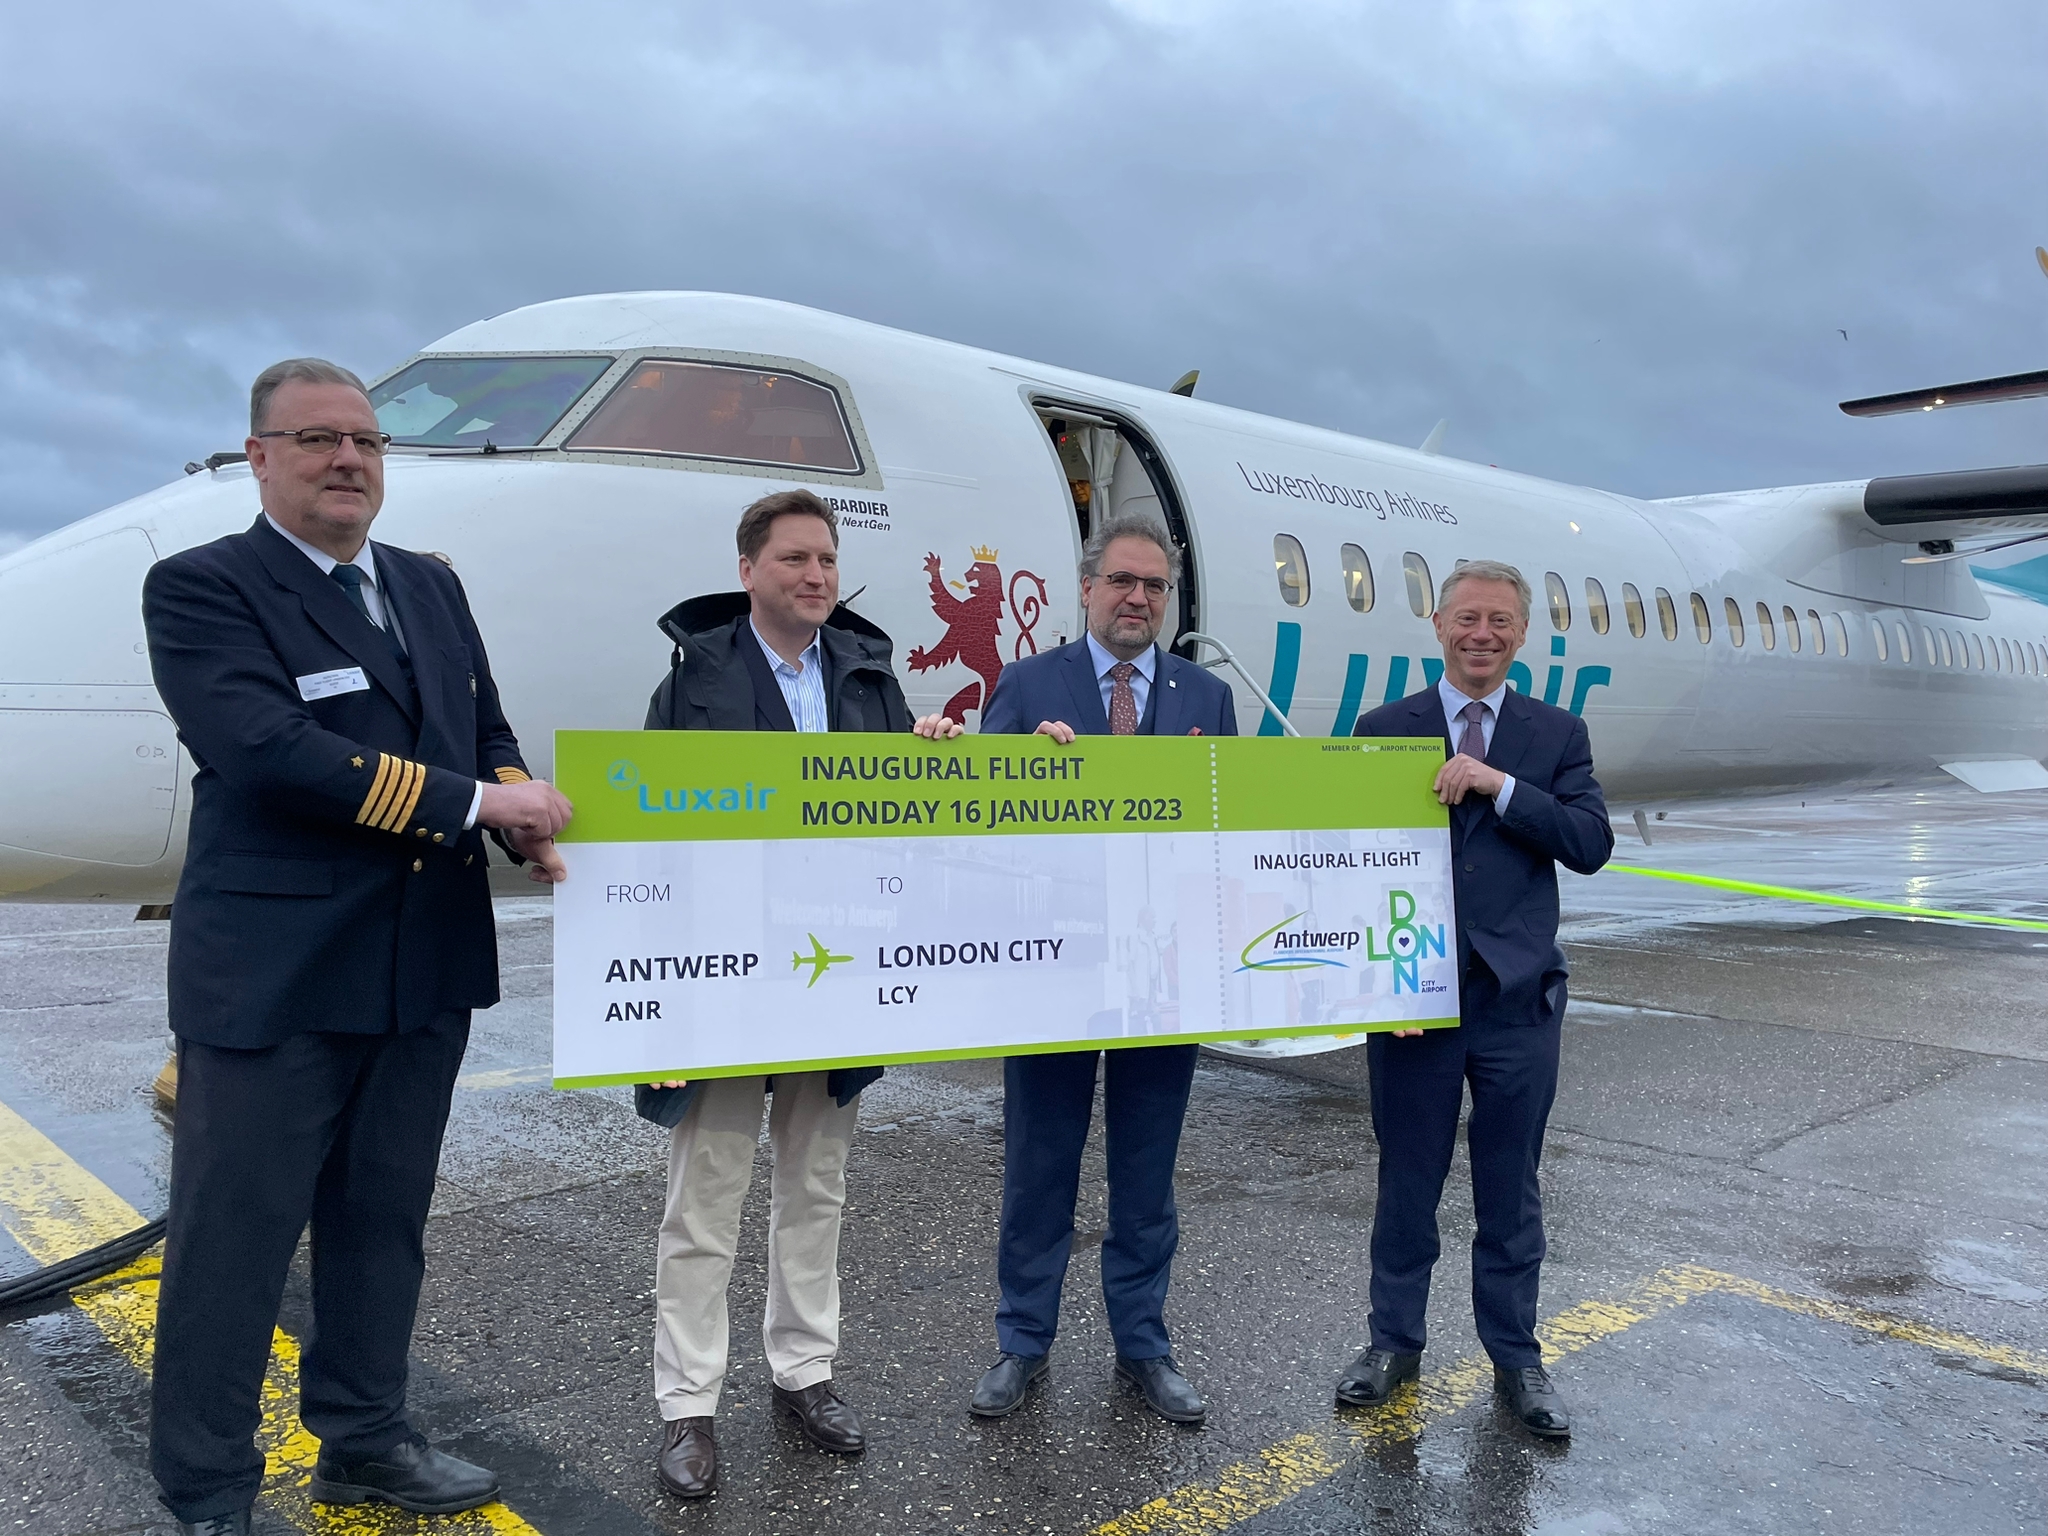 Antwerp welcomes return of direct link with Luxair to London City